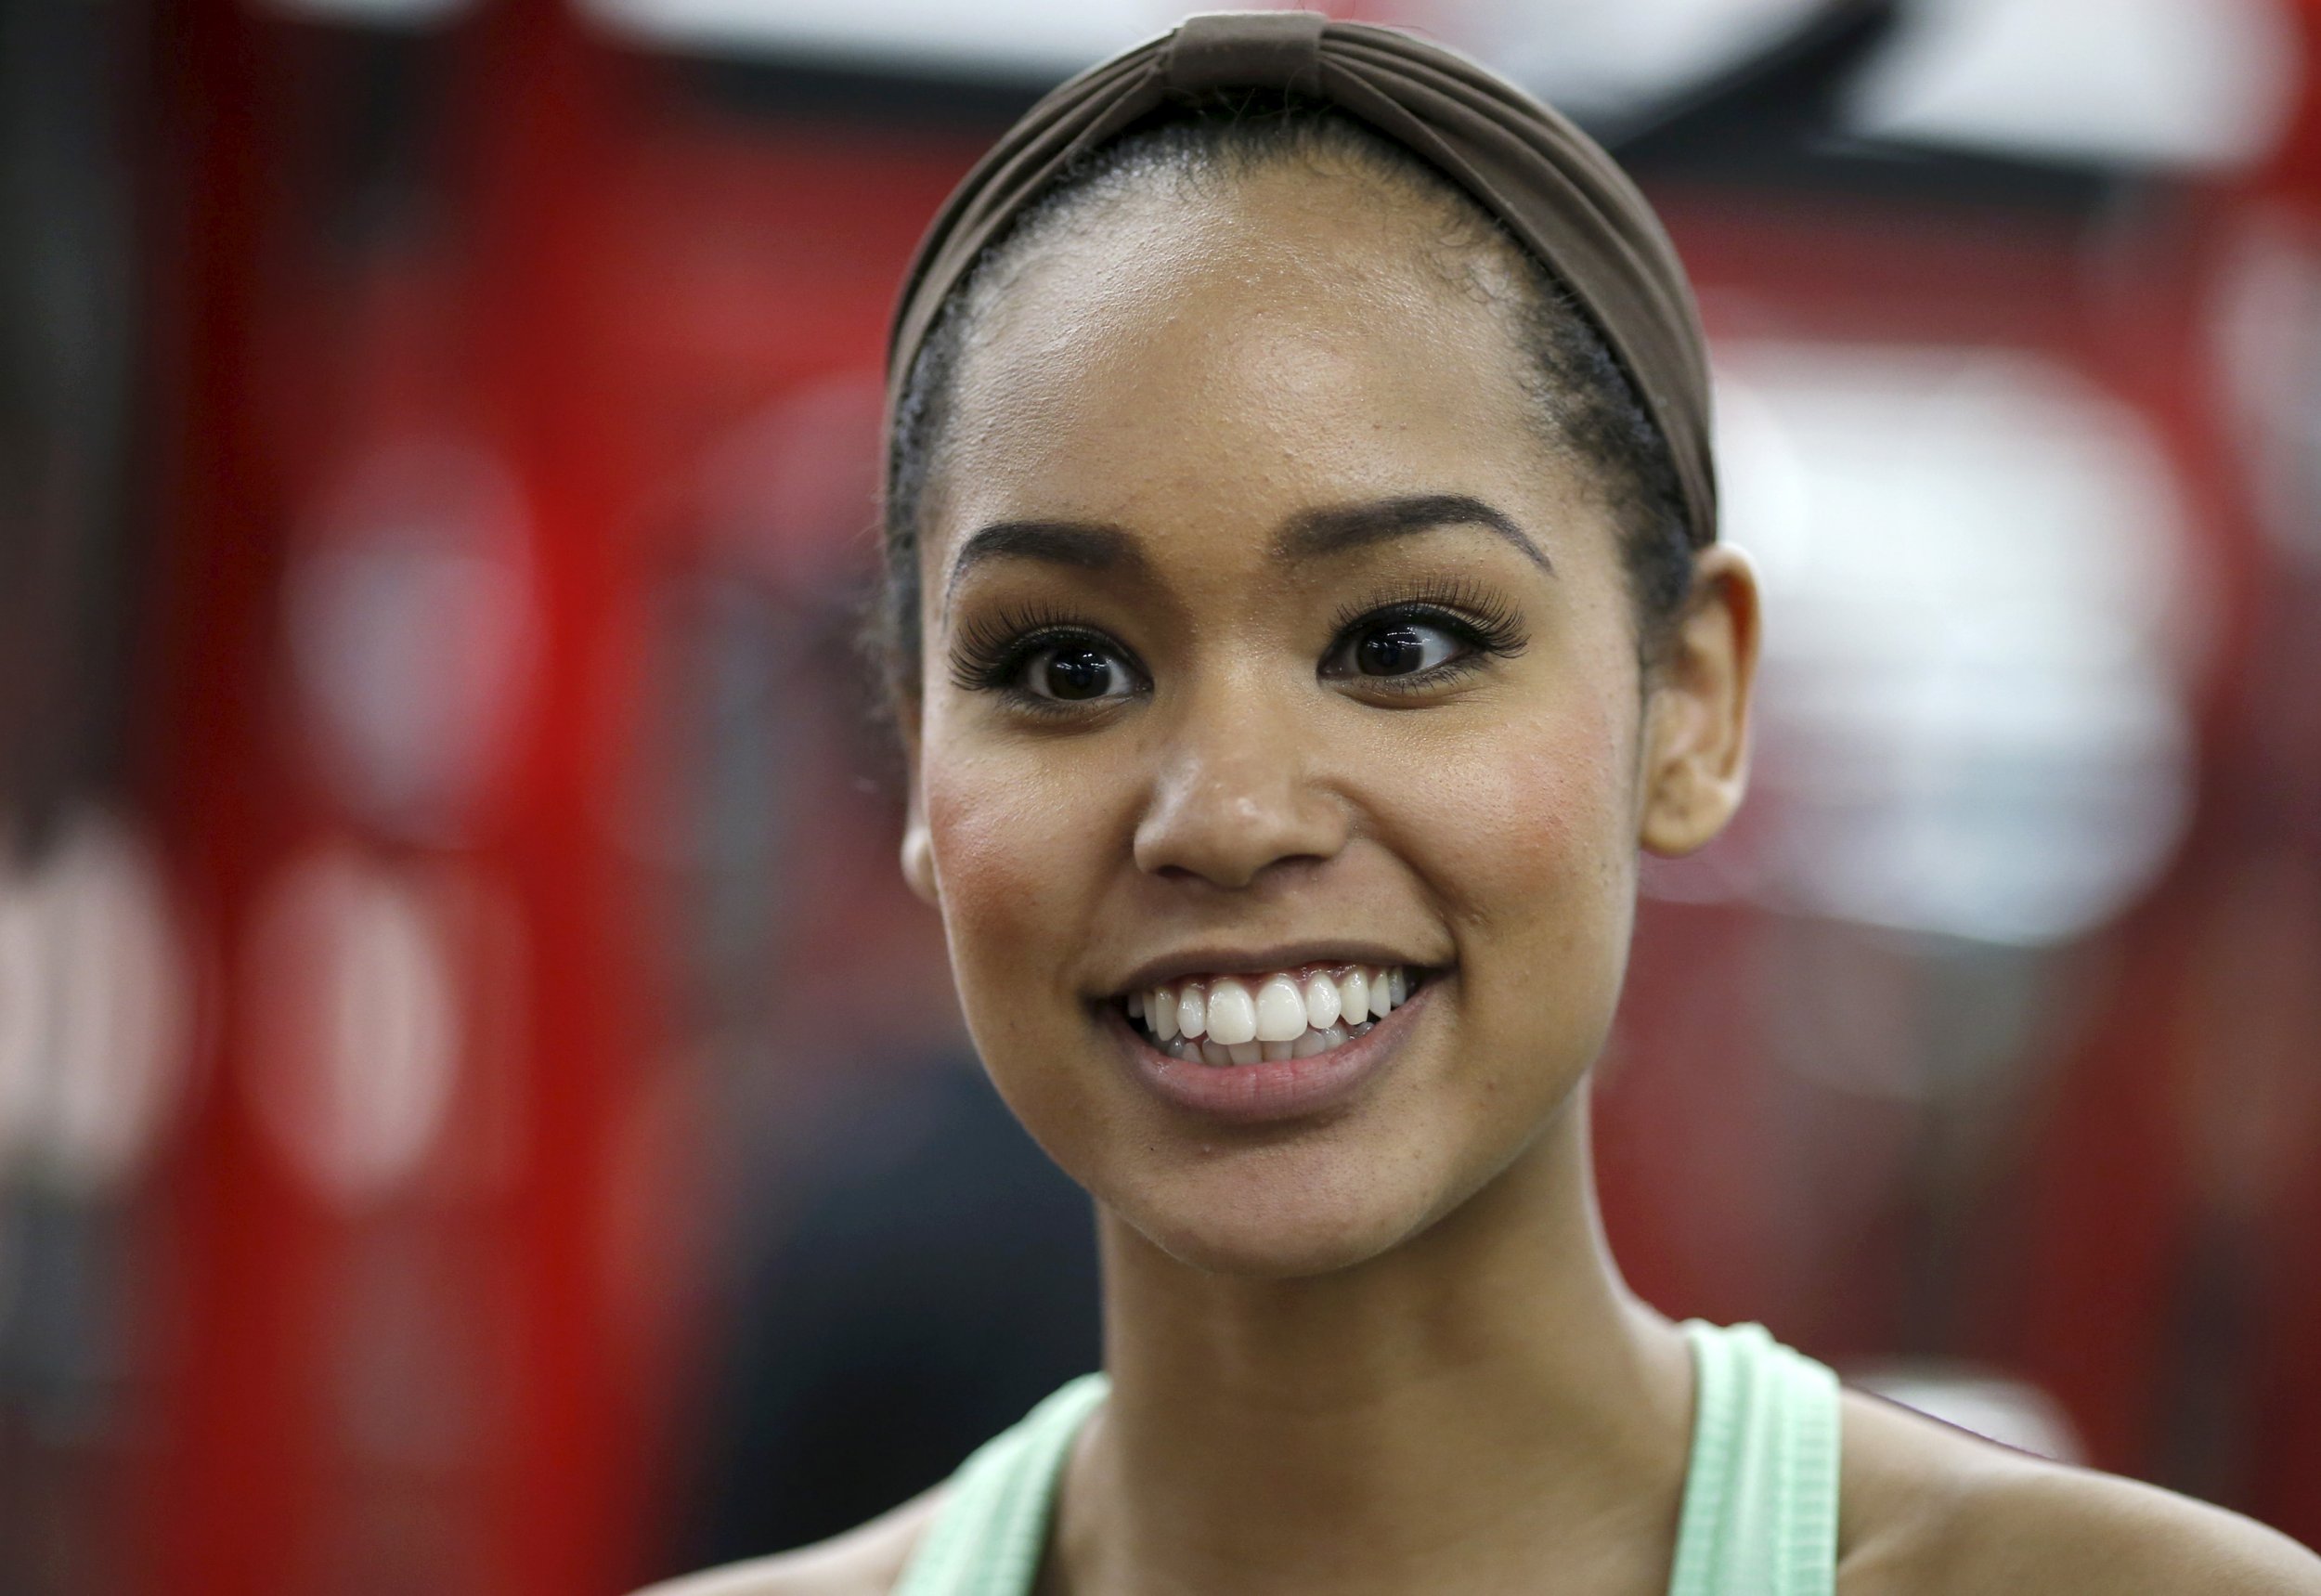 Ariana Miyamoto is first mixed-race person to represent Japan at Miss Unive...